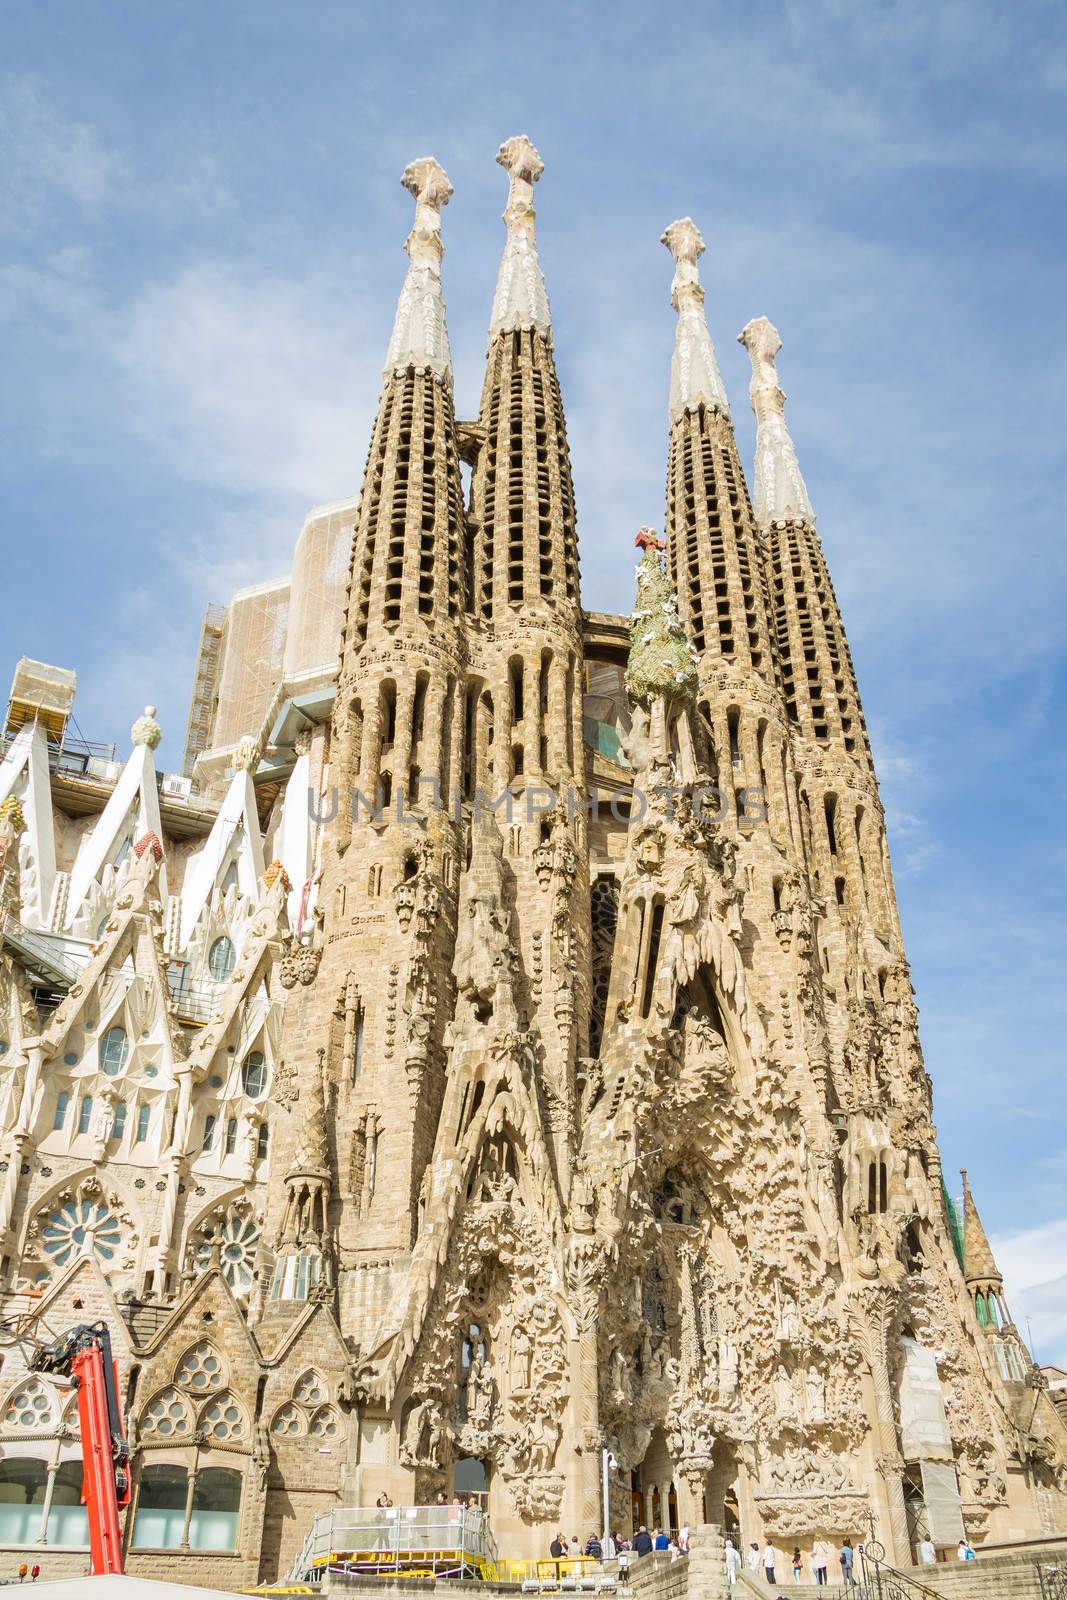 The Sagrada Familia cathedral in Barcelona, Spain by doble.d